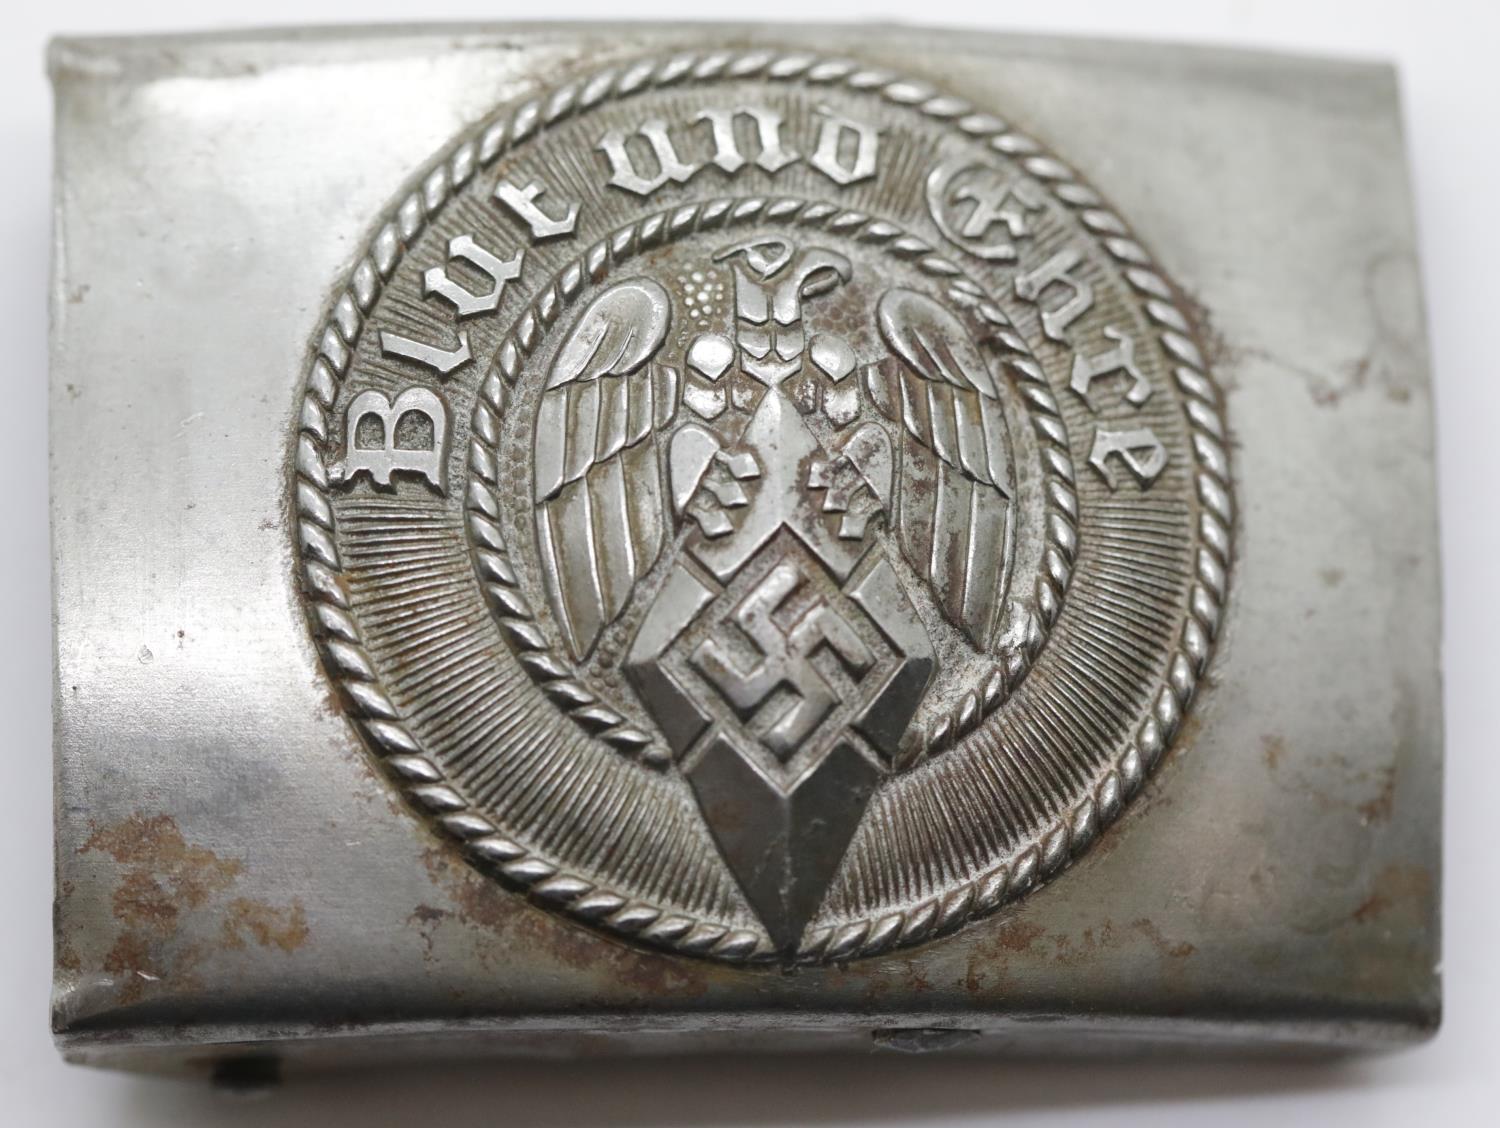 German Third Reich type Hitler Youth belt buckle. P&P Group 1 (£14+VAT for the first lot and £1+